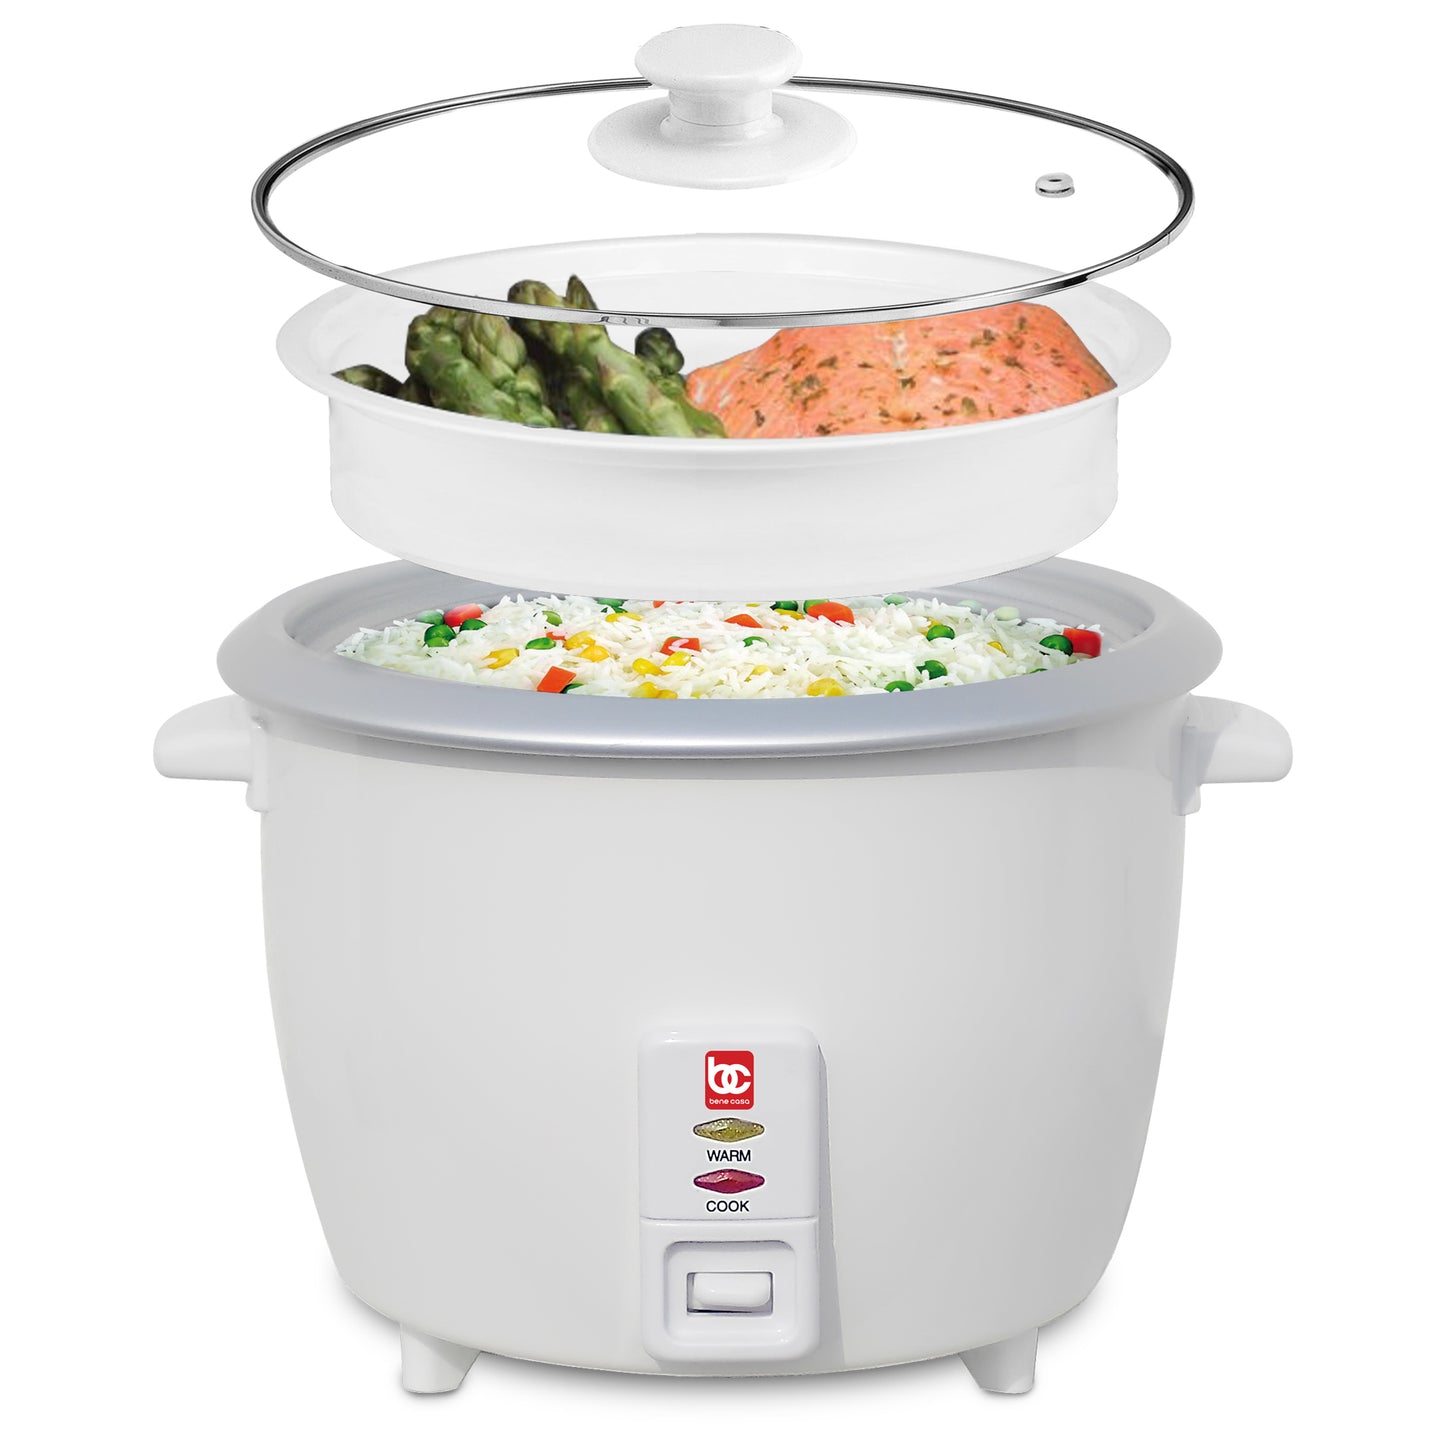 Bene Casa BC-43923 10-Cup Rice Cooker And Steamer